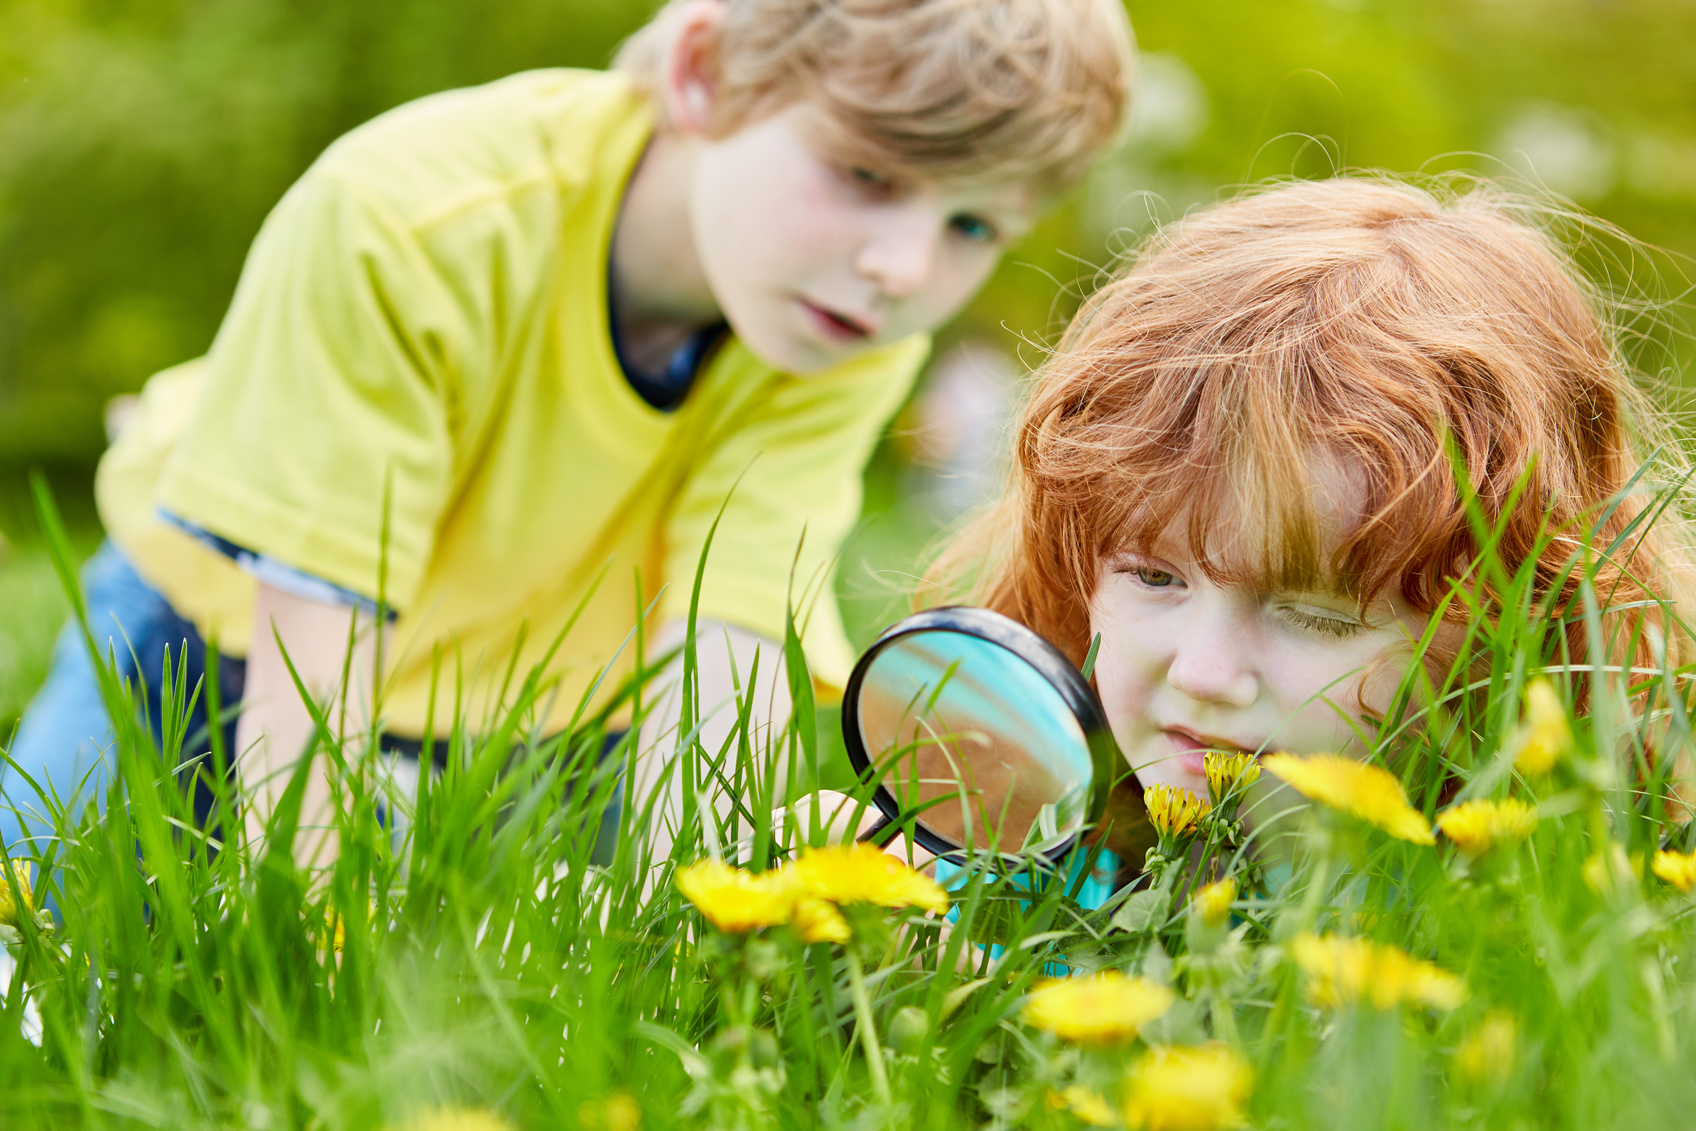 Children Discover Nature with Magnifying Glass